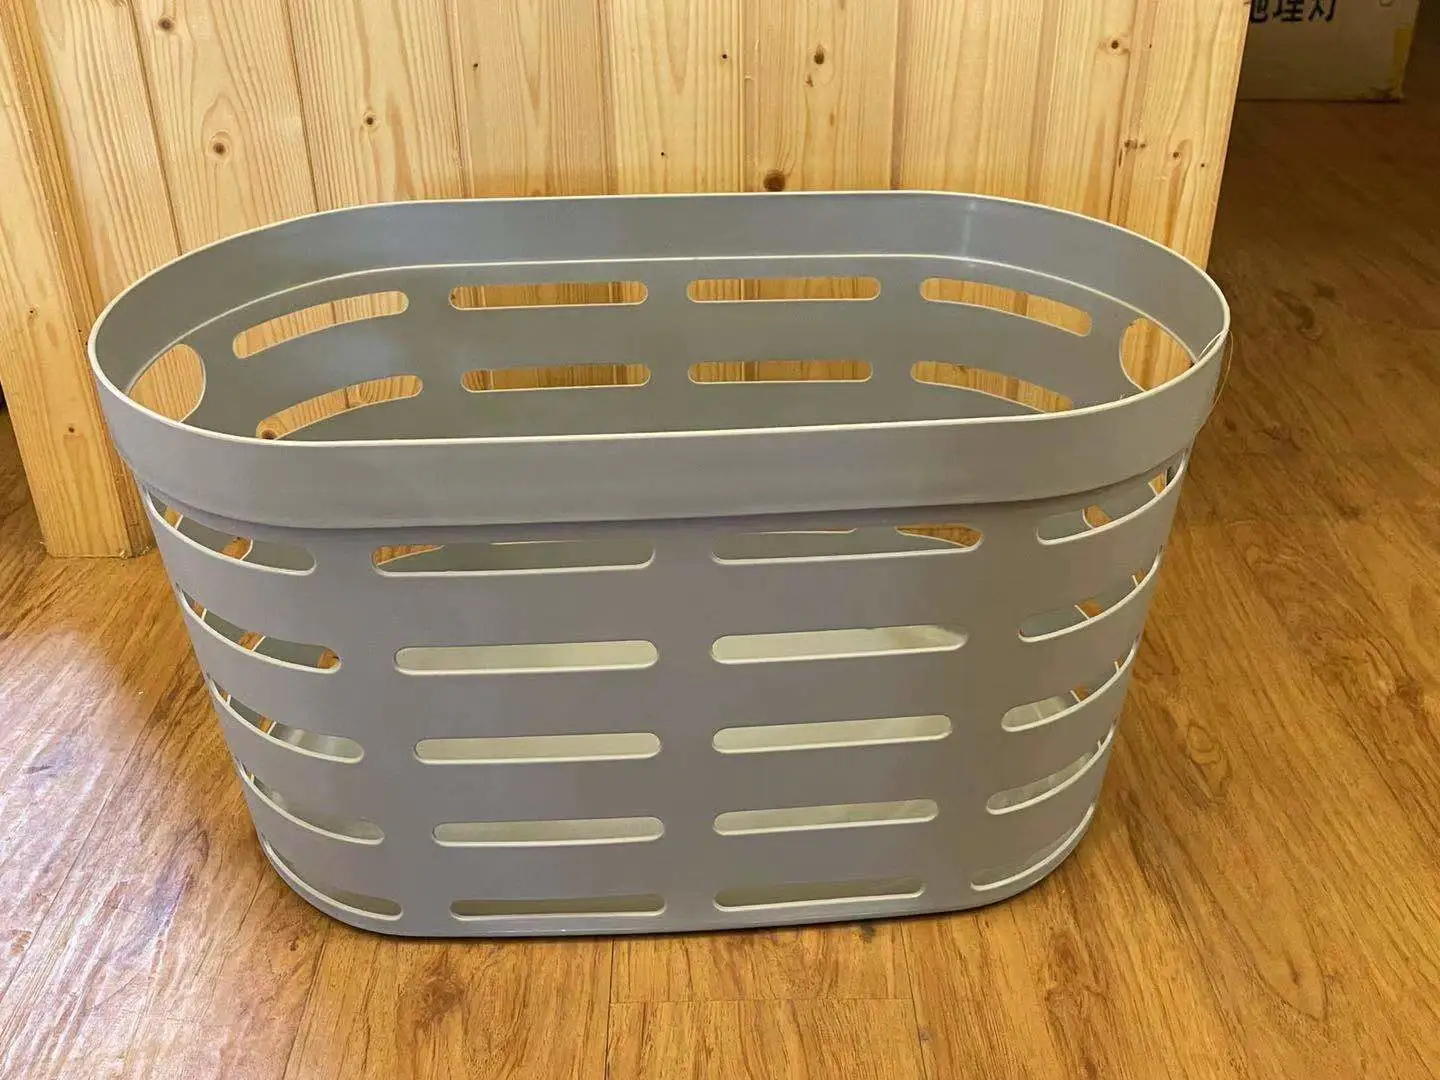 Plastic Wicker Laundry Basket Is Harvested From Renewable Resources